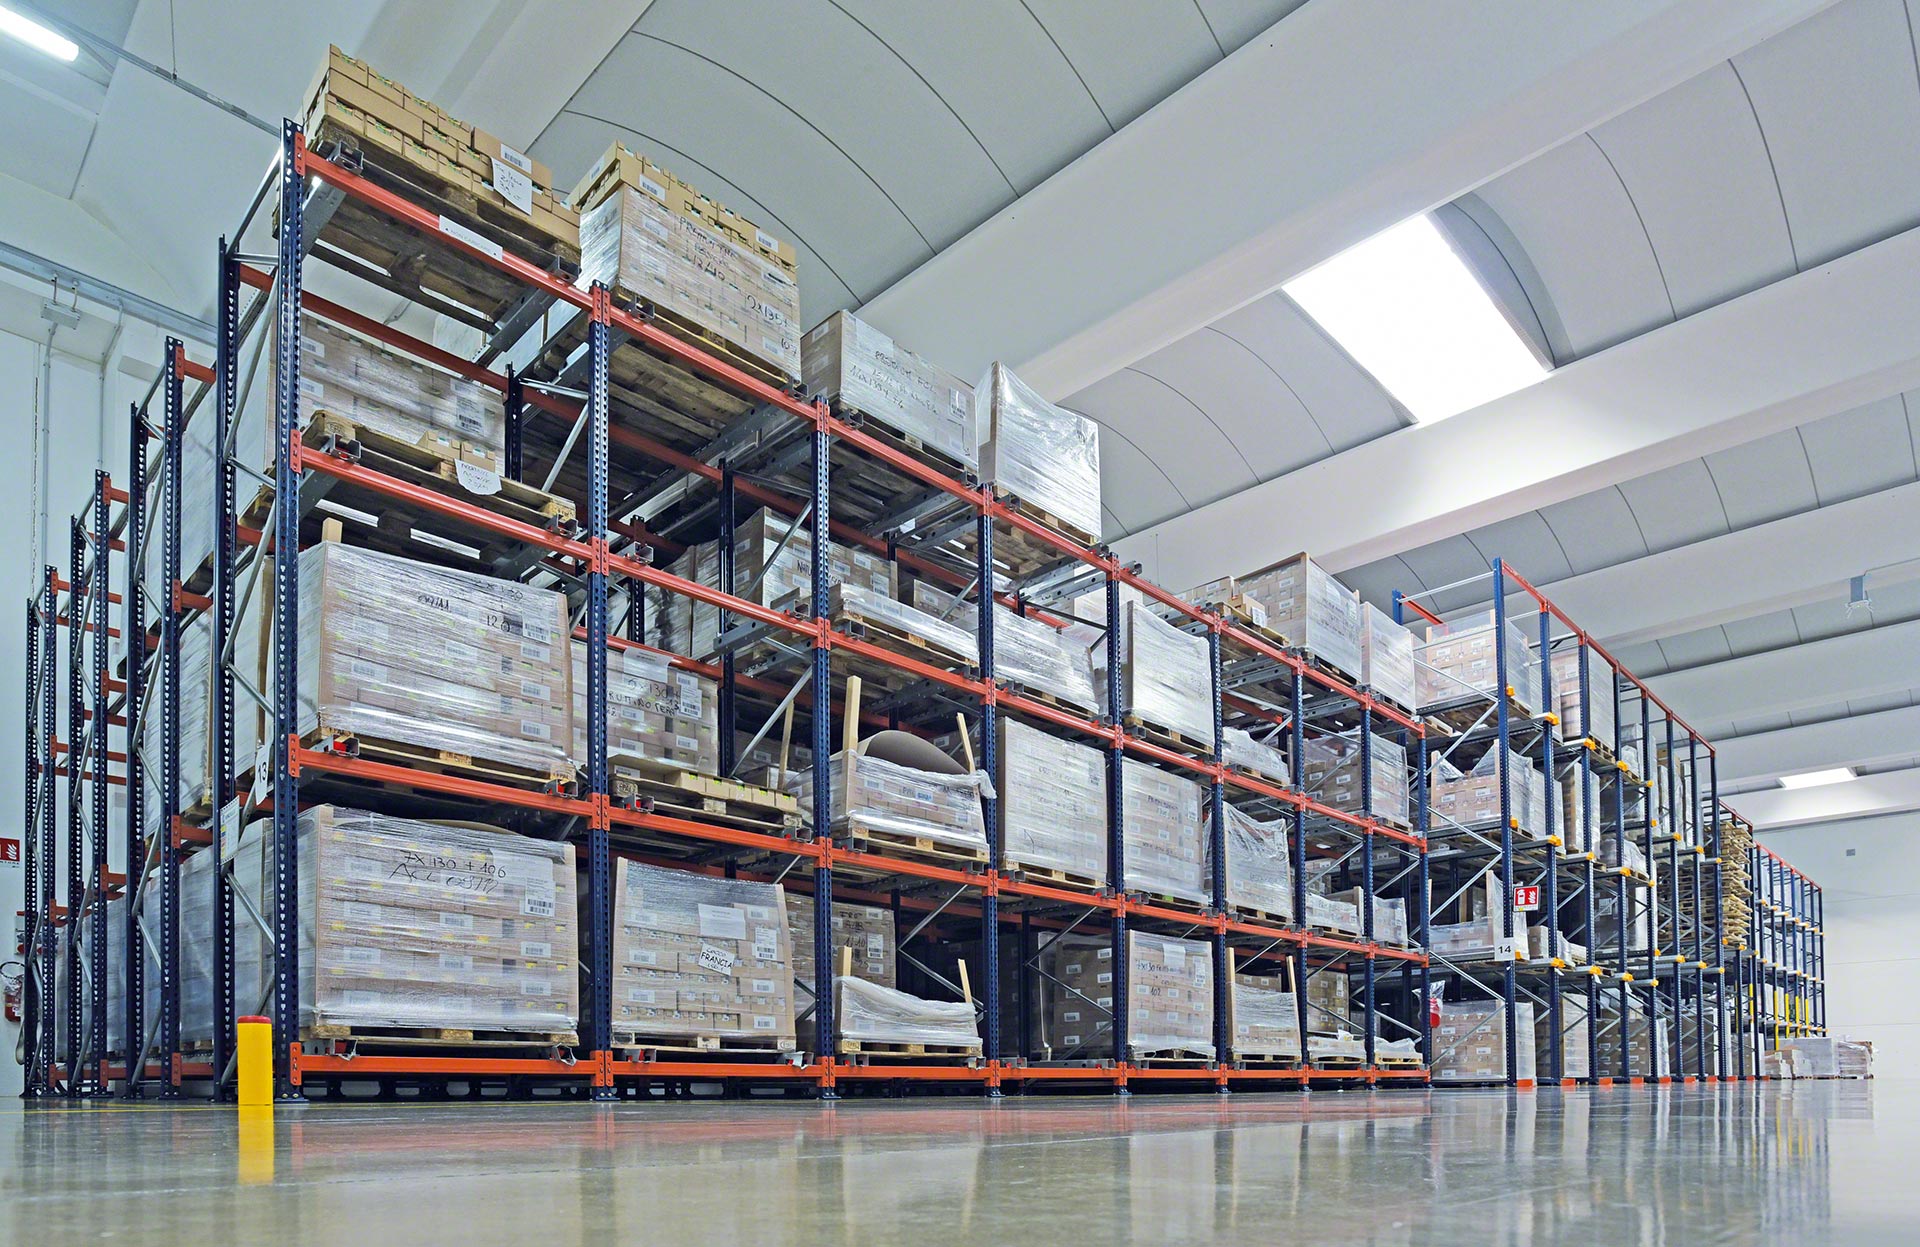 Push-back racking can be combined with other high-density storage systems